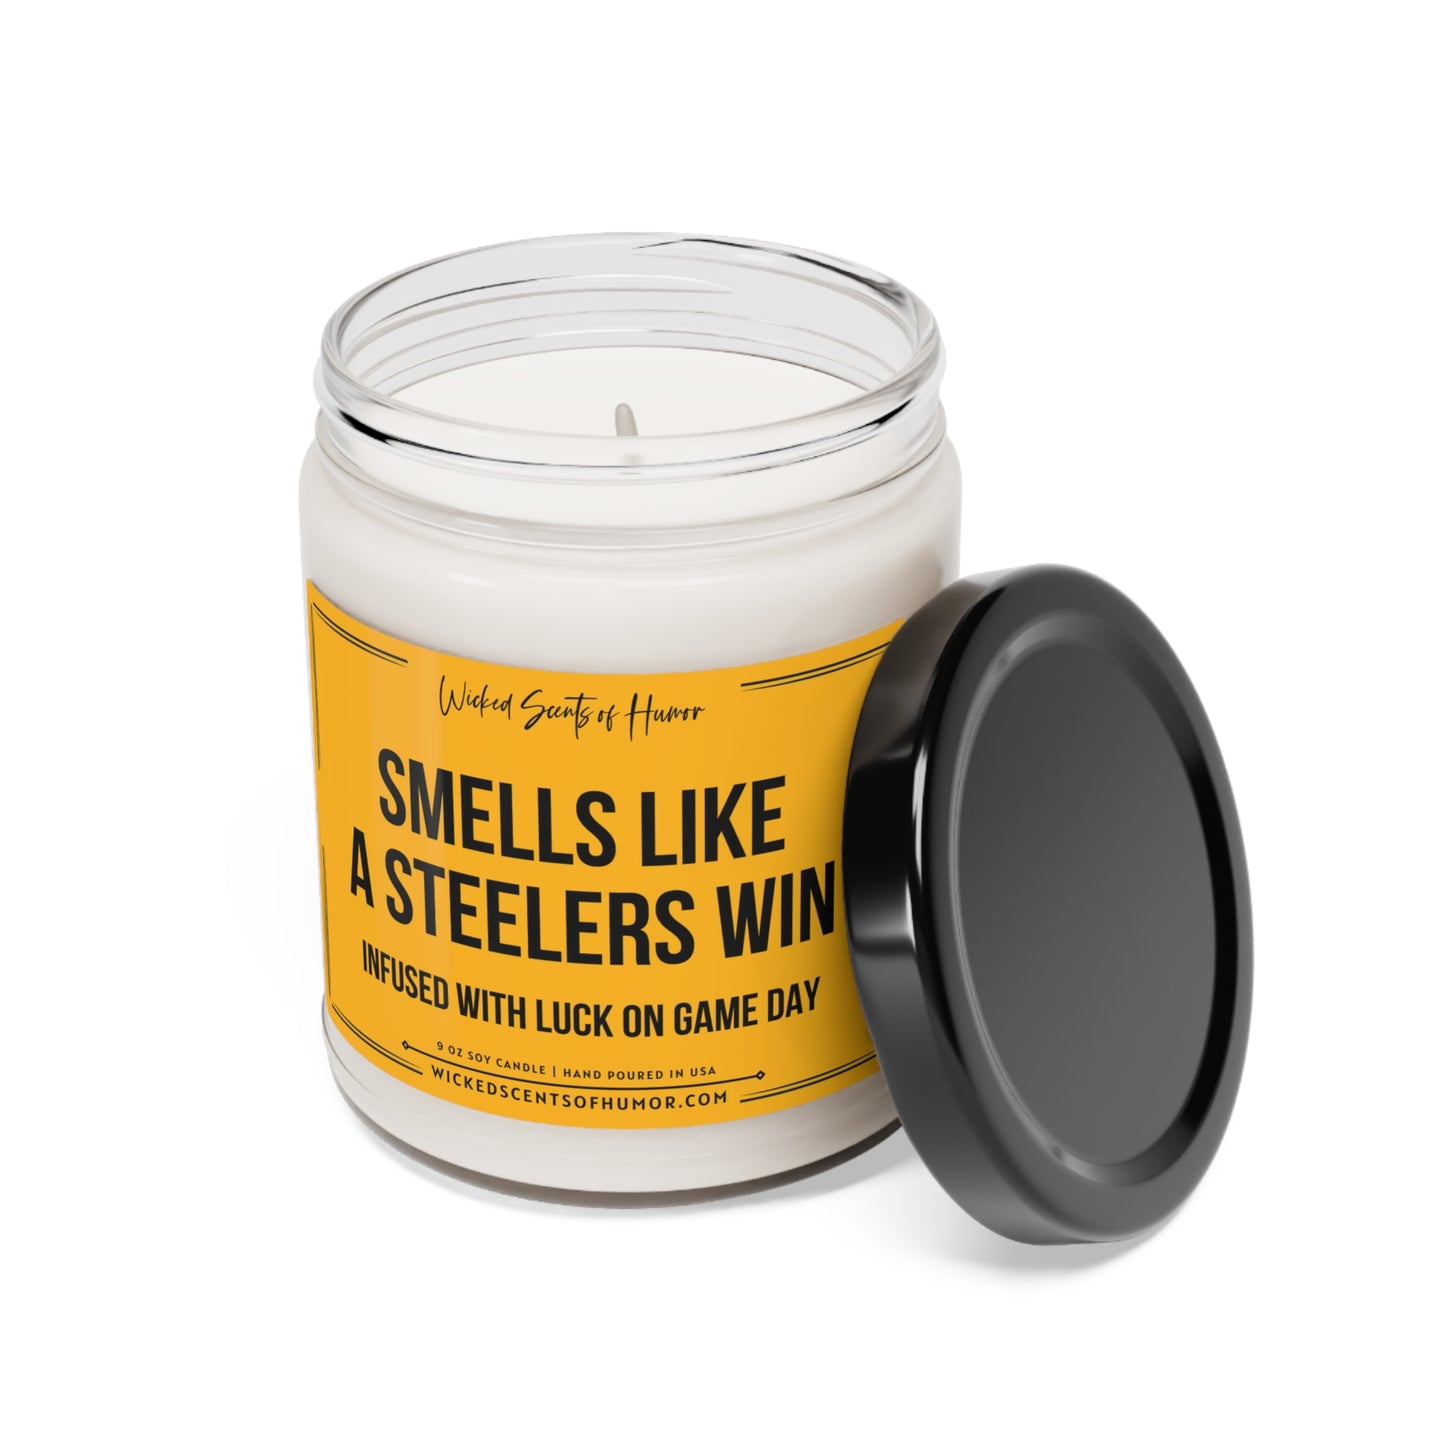 Smells Like A Steelers Win Candle, Unique Gift Idea, Pittsburgh Steelers Candle, NFL Gift Candle, Game Day Decor, Sport Themed Candle